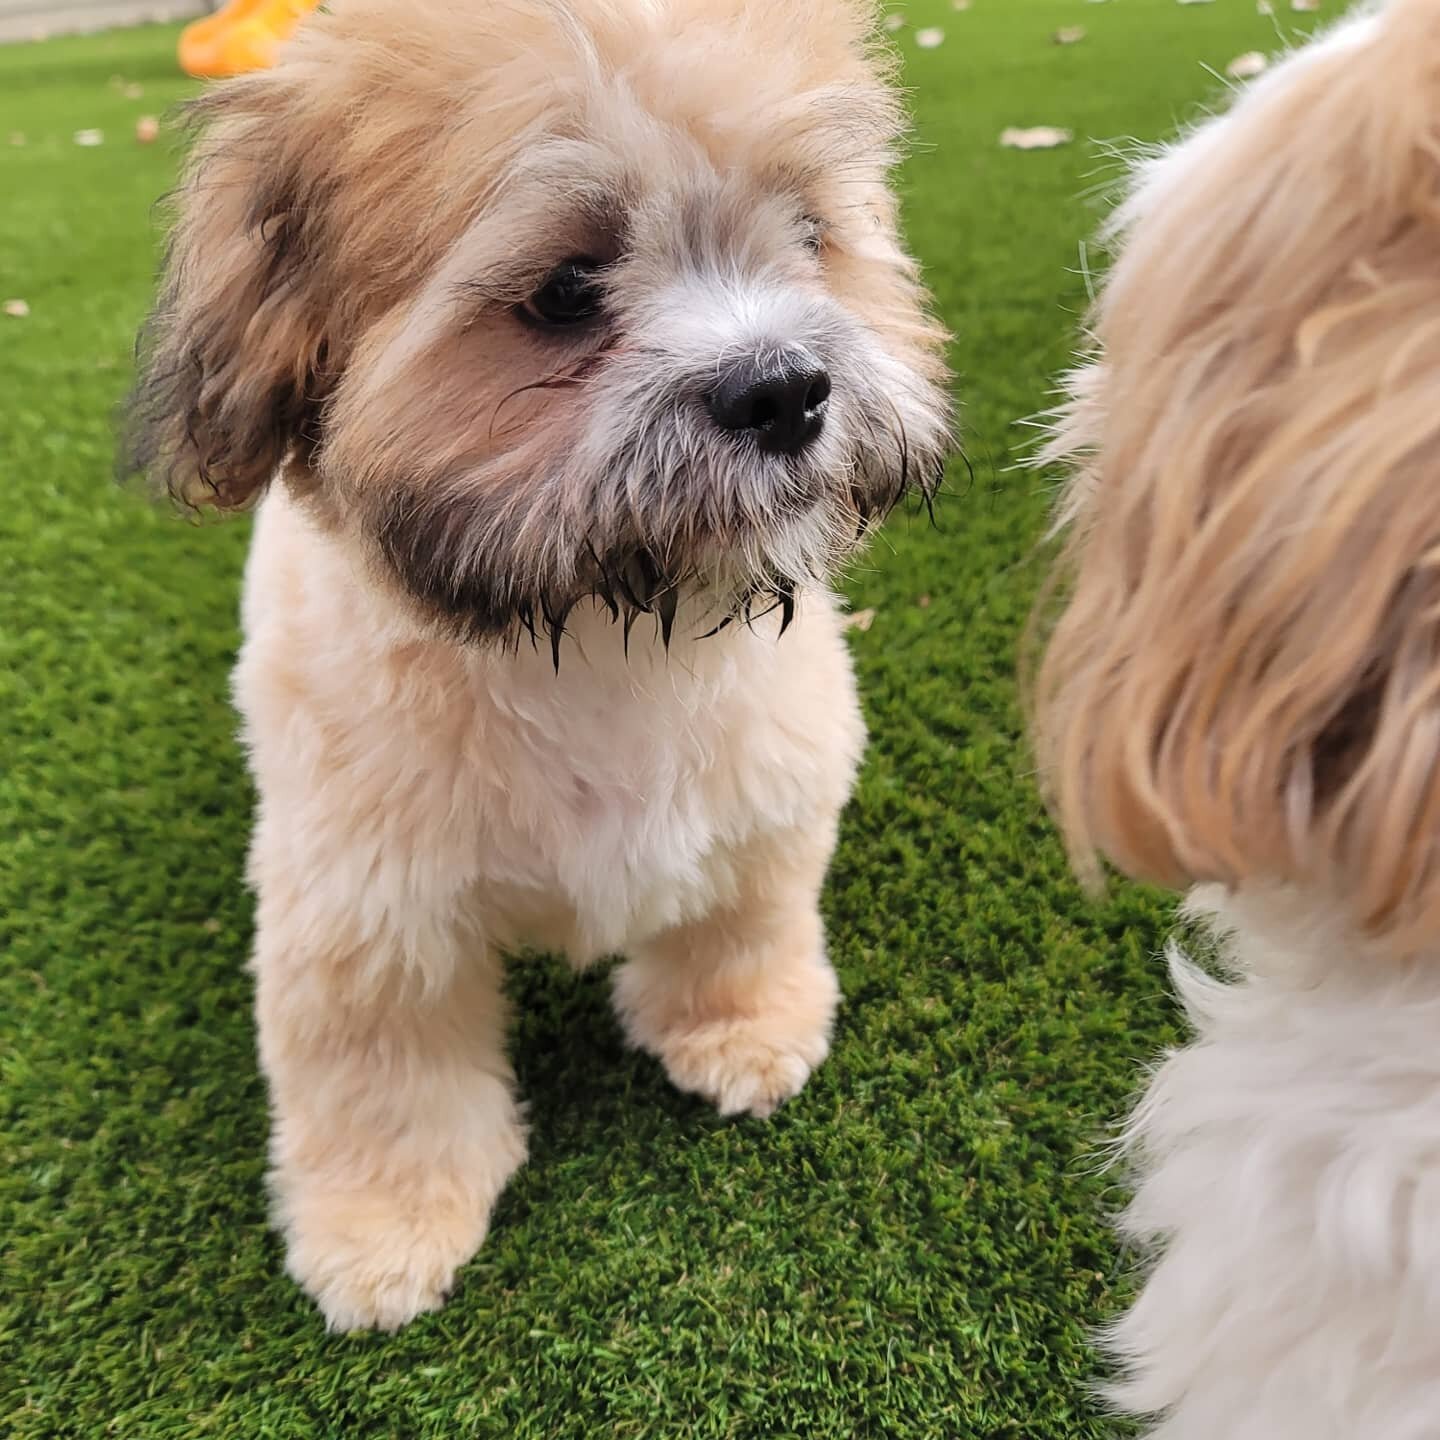 This adorable nugget is Toby and yes he's as soft as he looks. He is a Shih-Poo and is still a puppy. These are some pictures from his temperament test as well as today. The other Shih Tzu is Mason and he's a senior. Both of these cuties have lots of